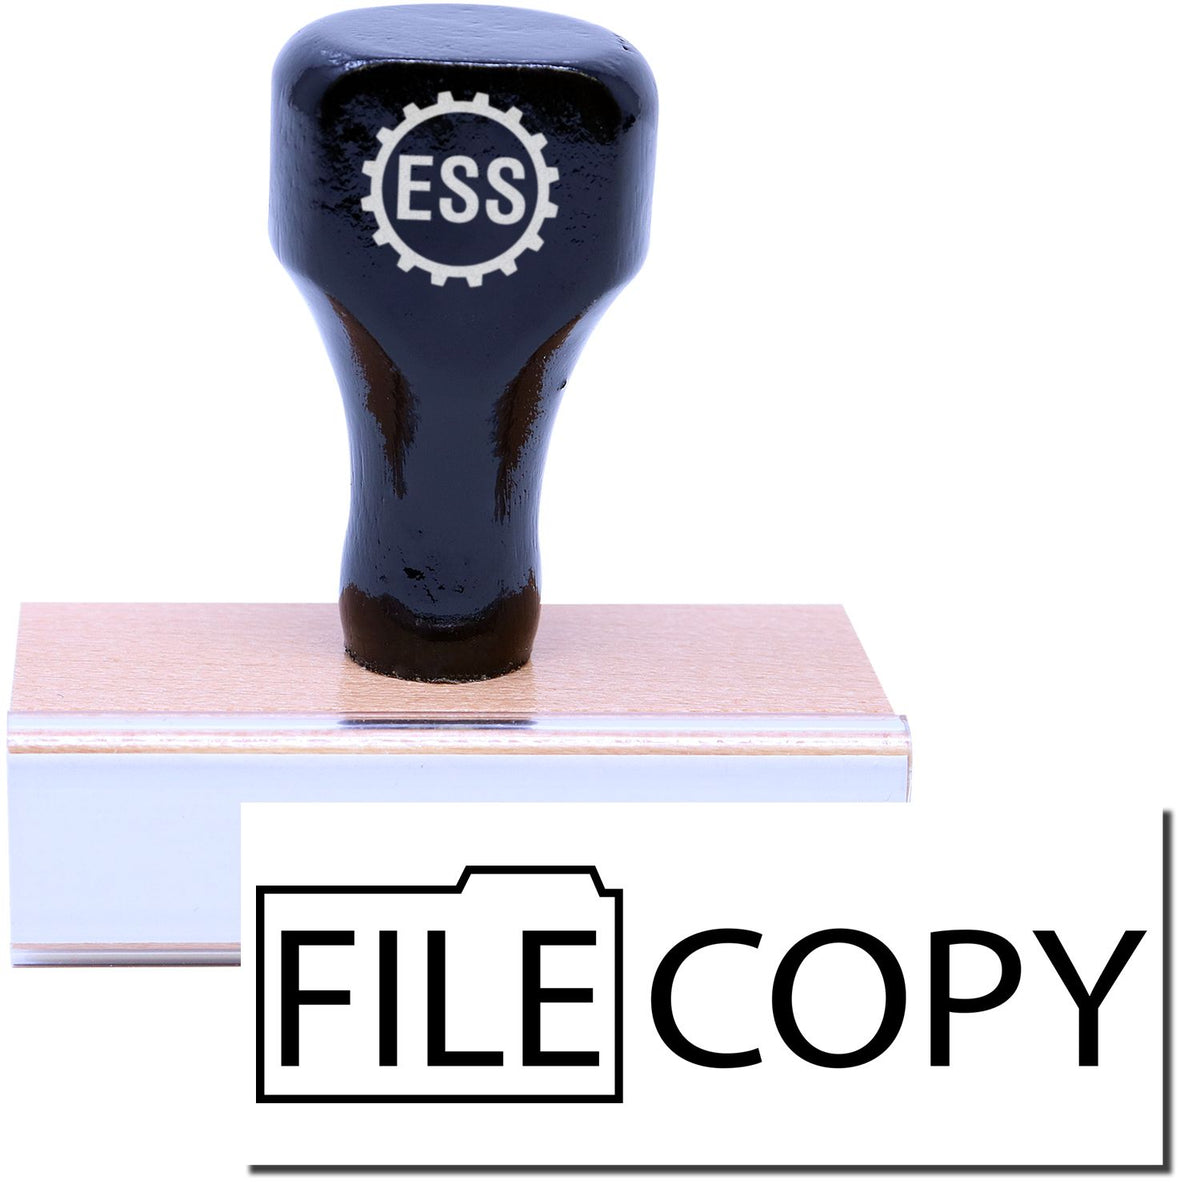 A stock office rubber stamp with a stamped image showing how the text &quot;FILE COPY&quot; with a graphic of a folder around the word &quot;FILE&quot; is displayed after stamping.